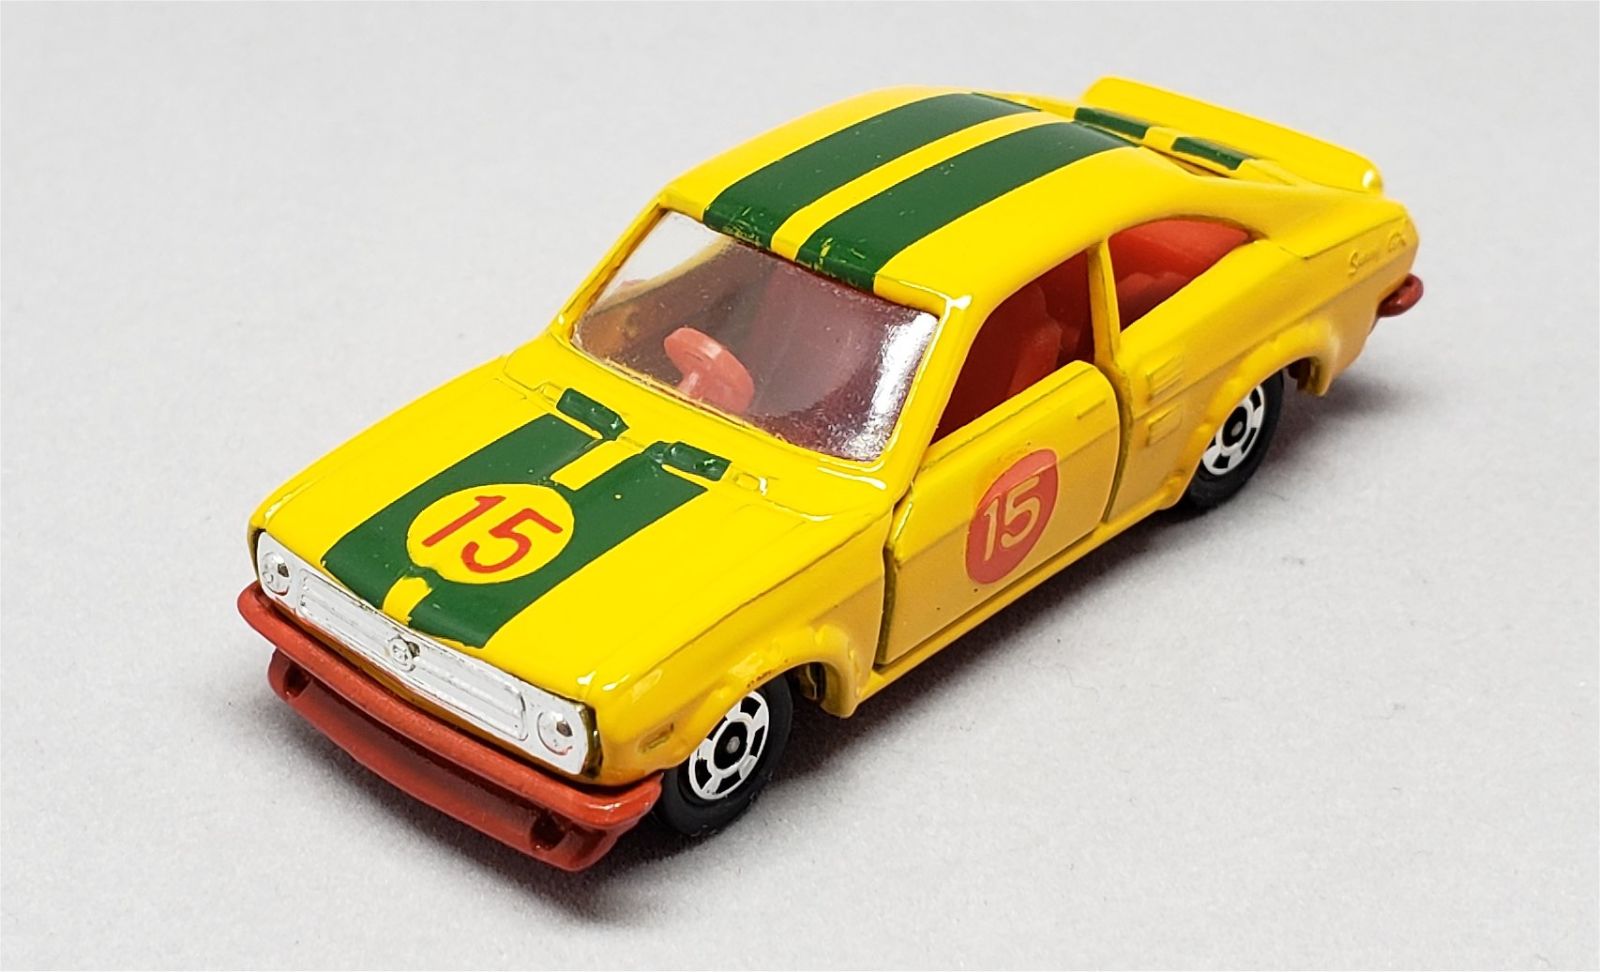 Illustration for article titled [REVIEW] Tomica Datsun Sunny 1200 Coupe Racing